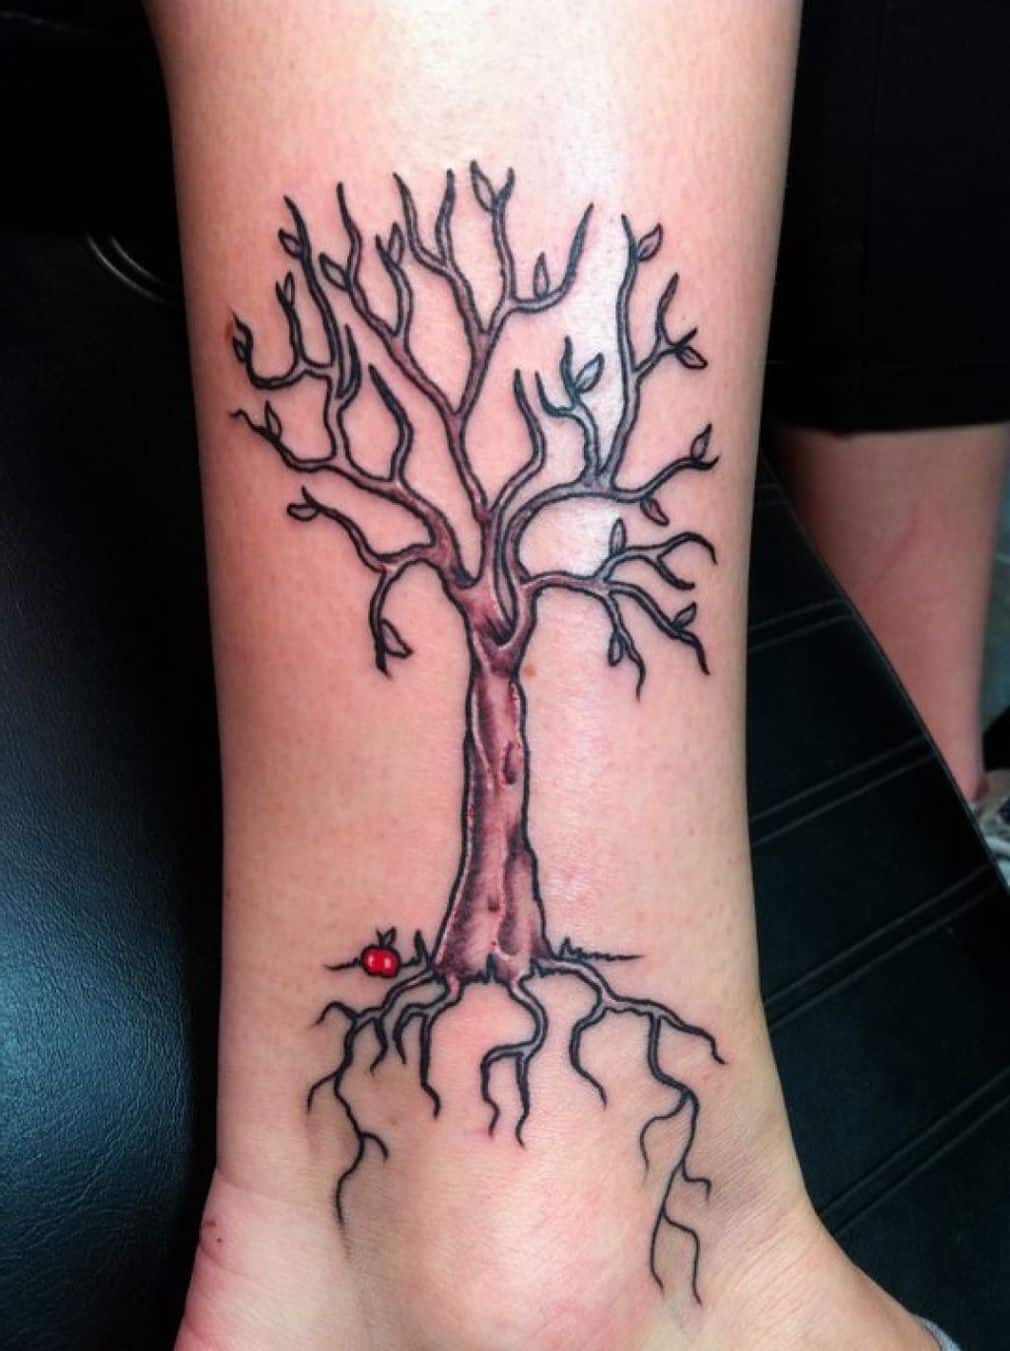 Details more than 64 tattoos of weeping willow trees super hot  thtantai2